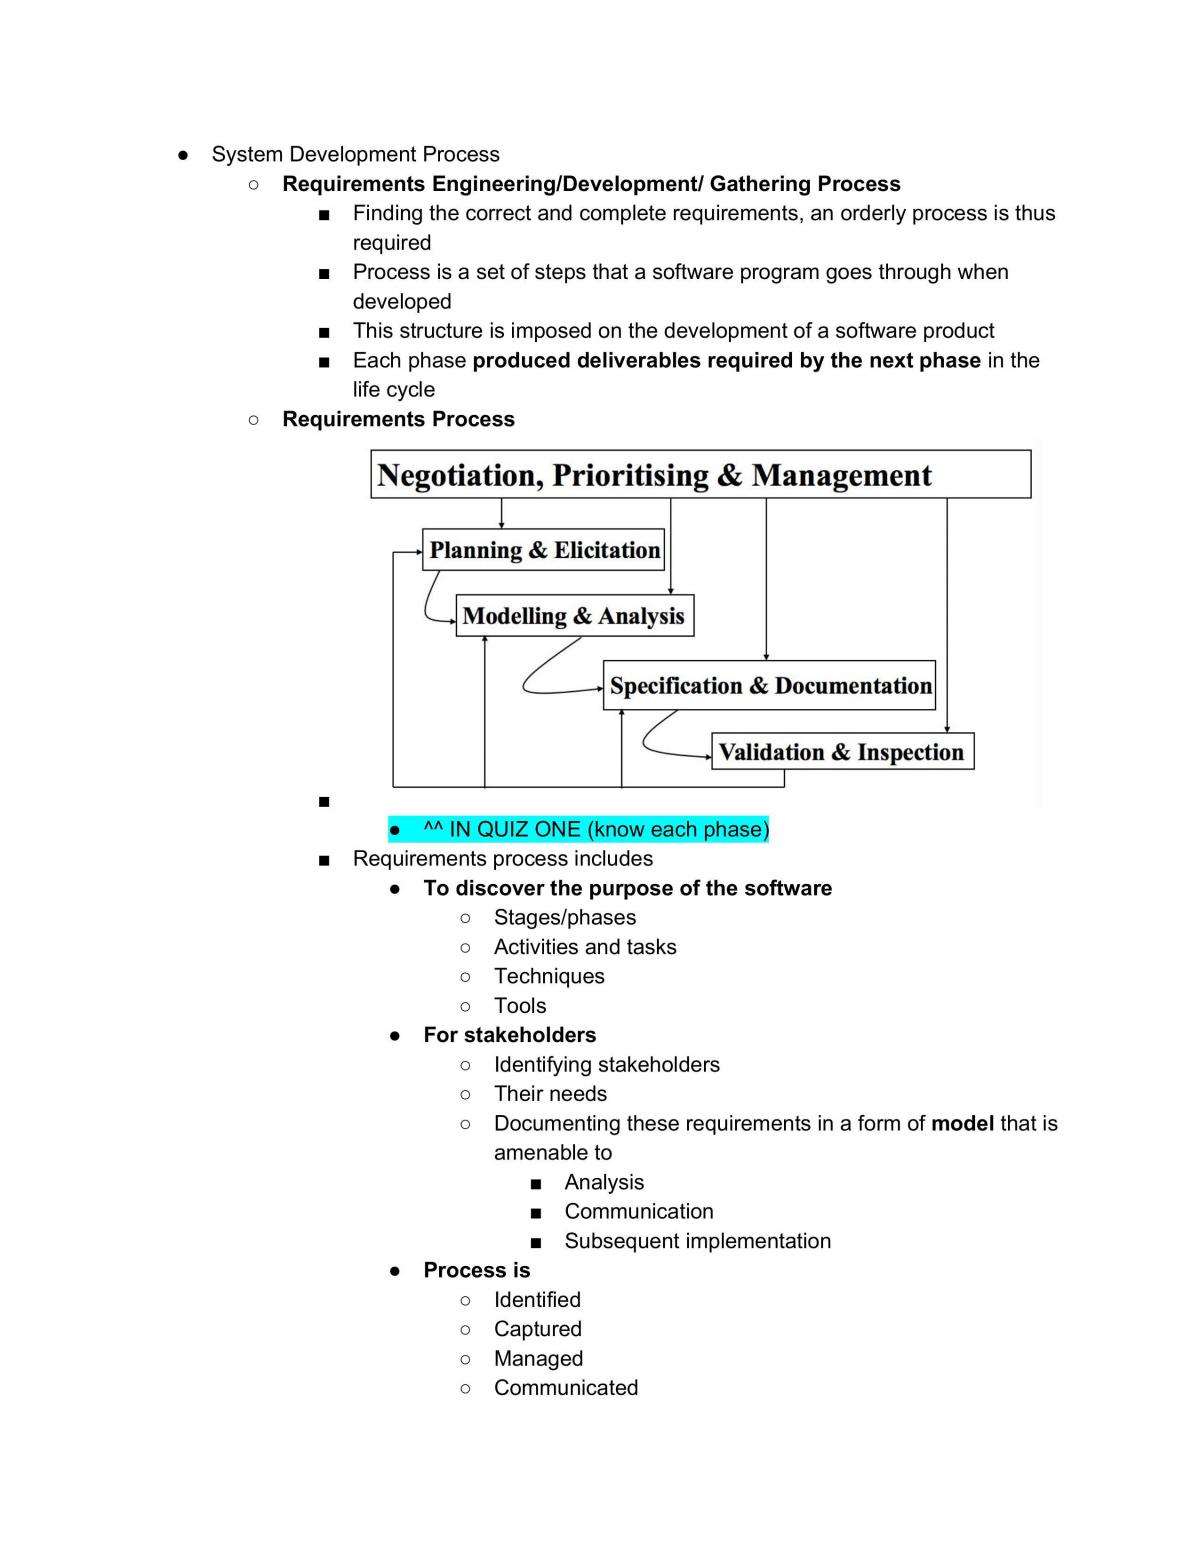 HD Notes - UTS 31269 Business Requirements Modelling  - Page 3